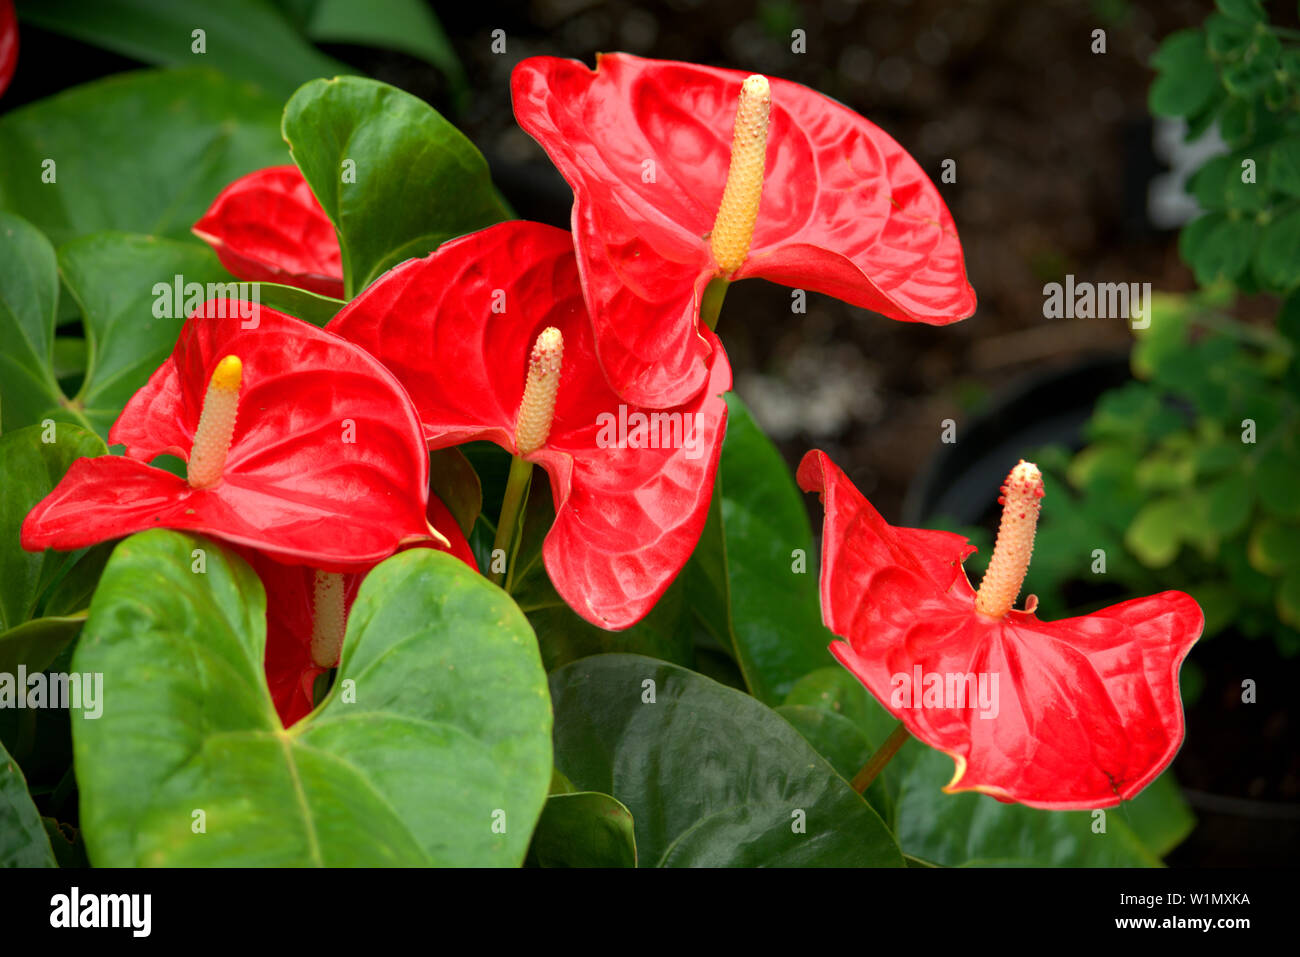 Image of a flowering bract of anthurium or red peace lily Stock Photo